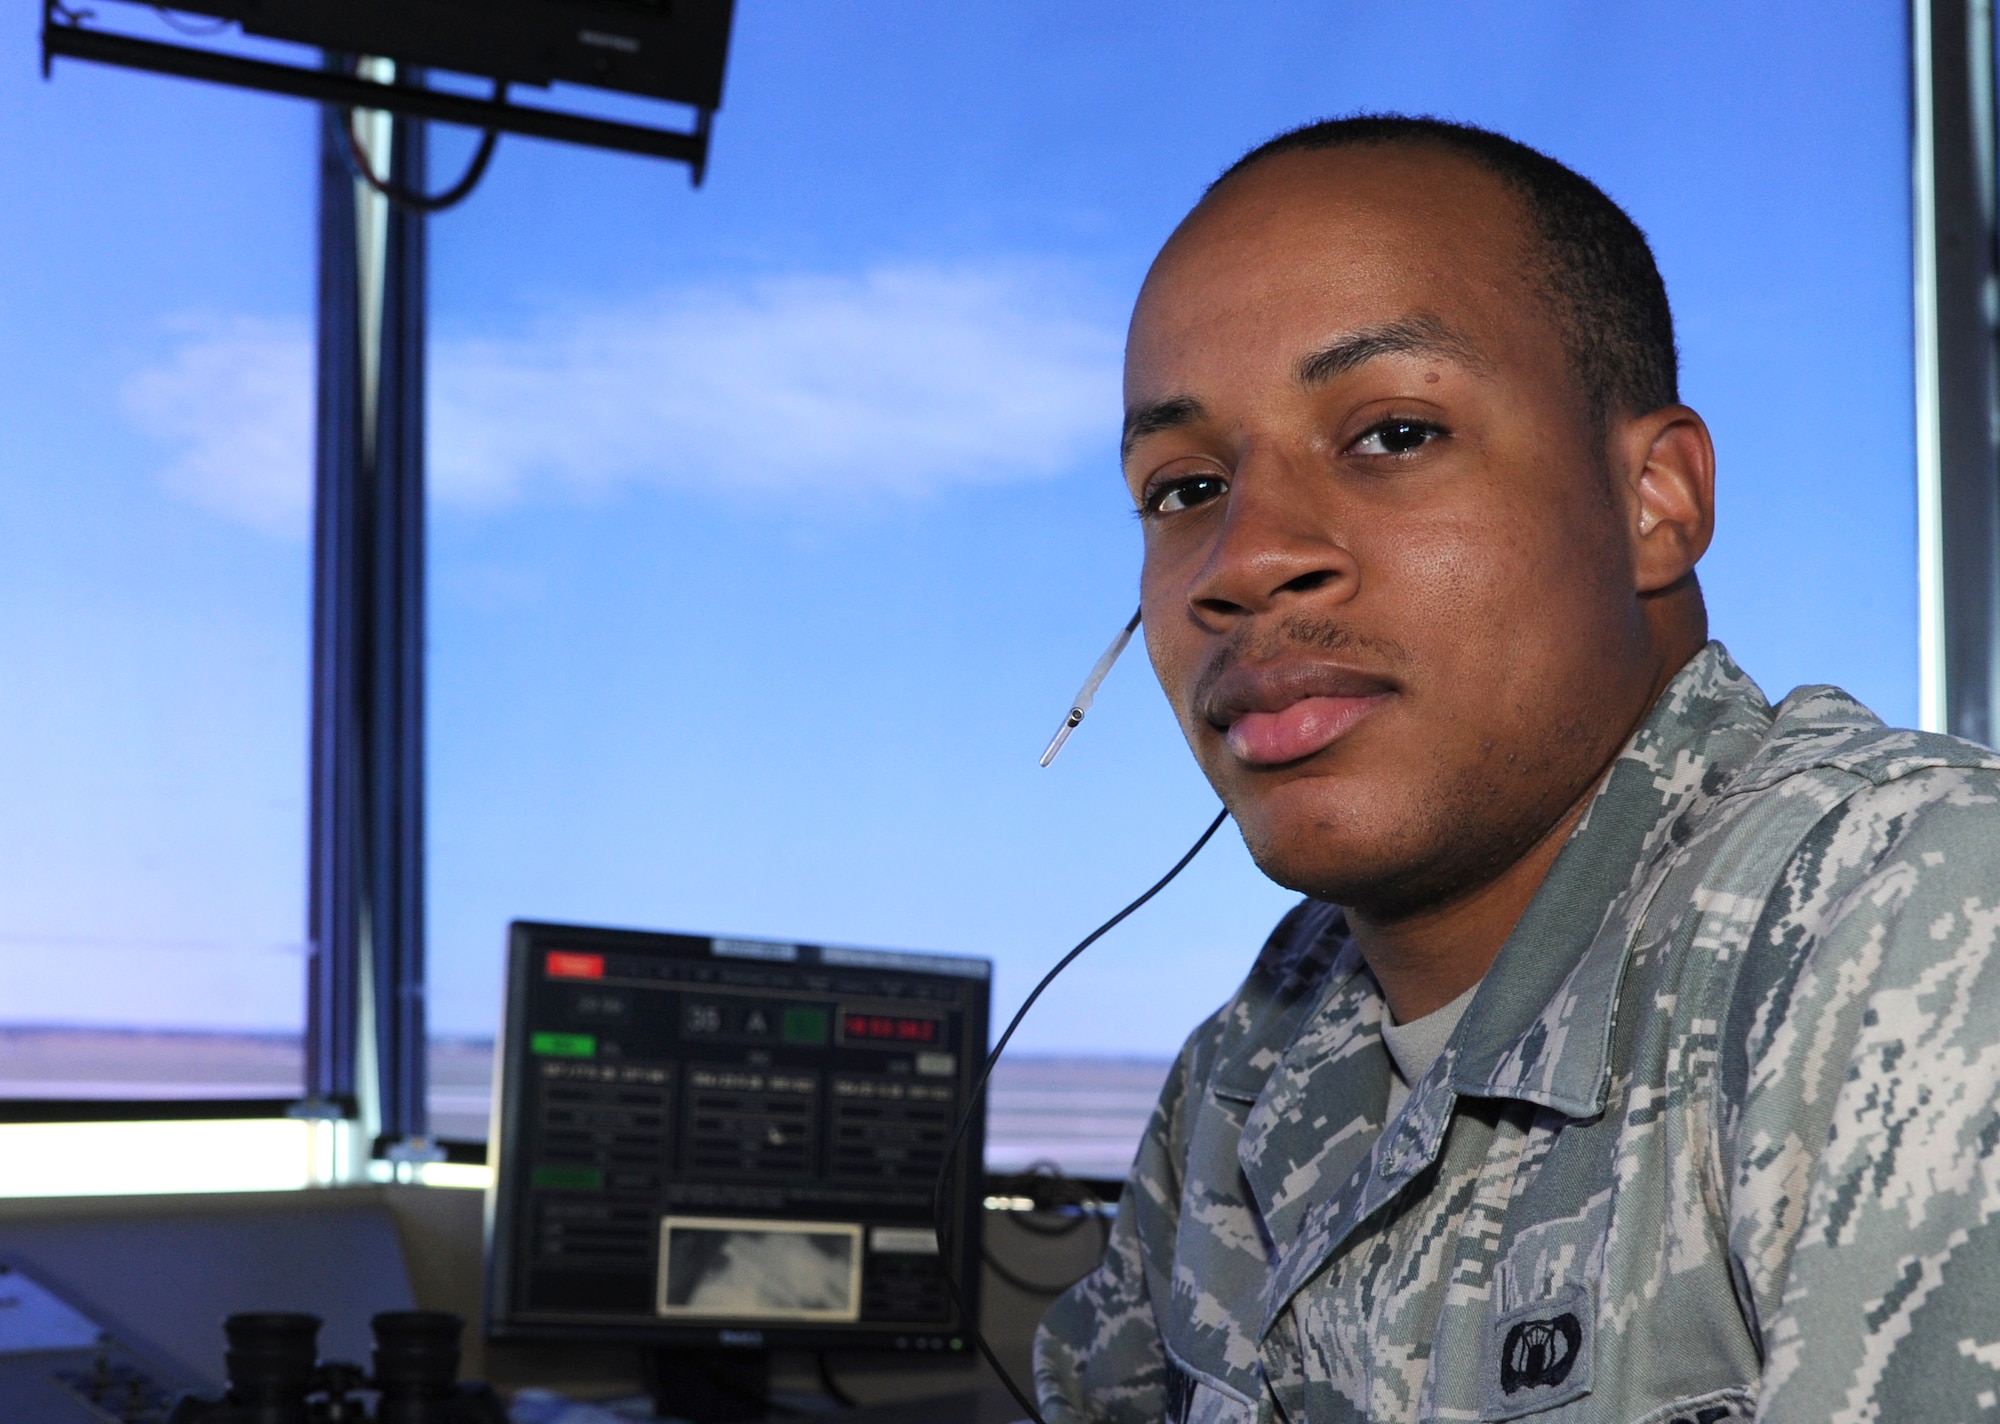 Senior Airman Jamal Perry, an air traffic controller with the 71st Operations Support Squadron, is the 71st Flying Training Wing Airman of the Month for May at Vance Air Force Base, Okla. (U.S. Air Force photo/ Airman 1st Class Frank Casciotta)